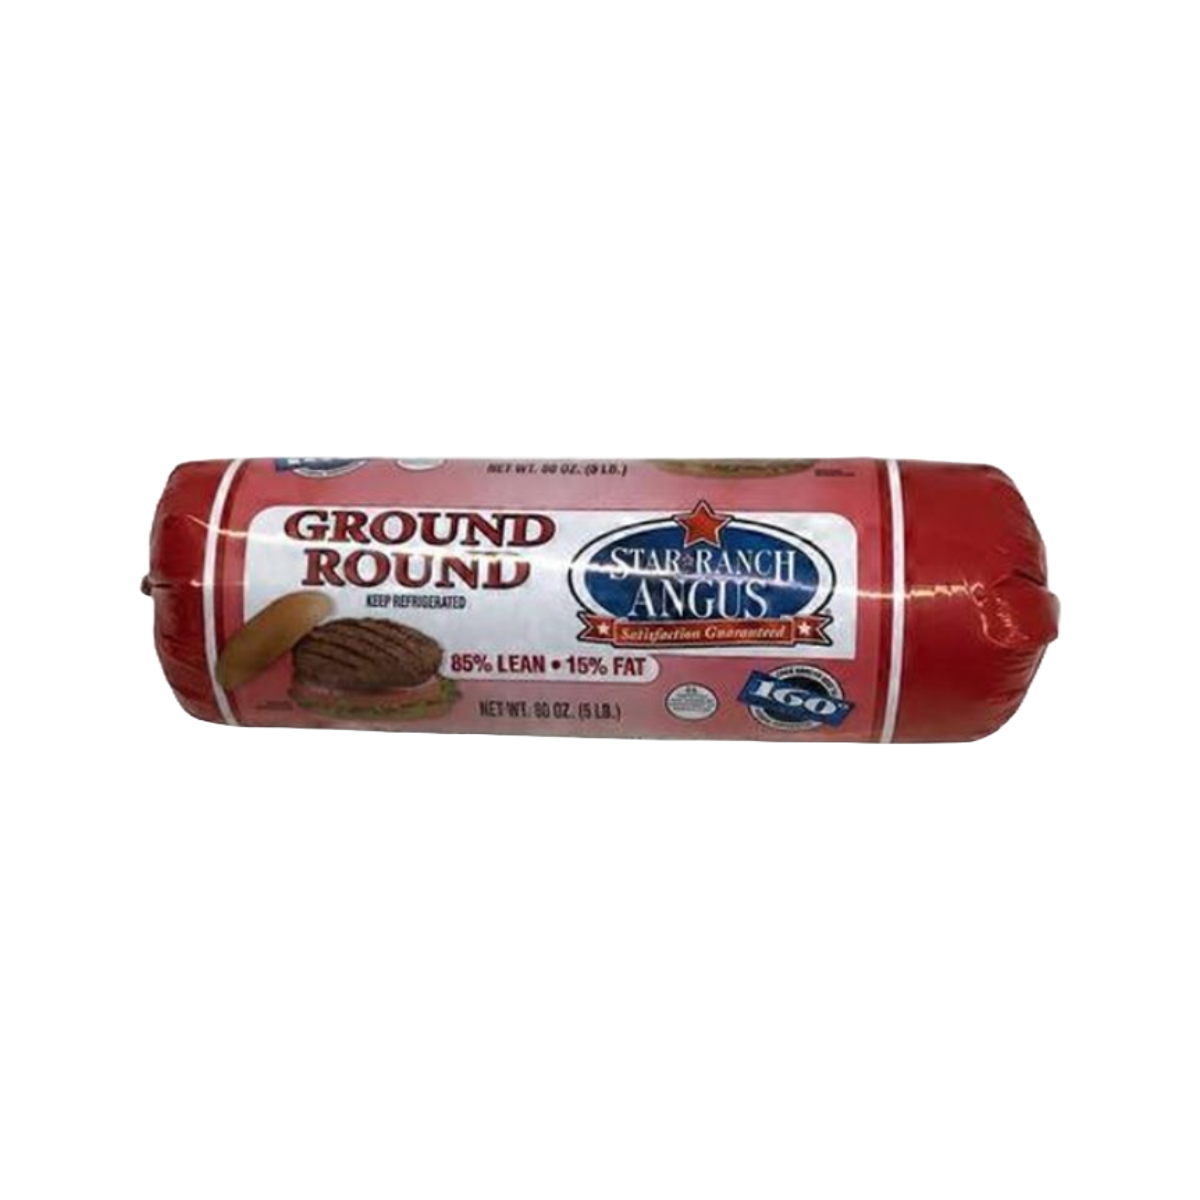 STAR RANCH ANGUS GROUND BEEF 85% LEAN